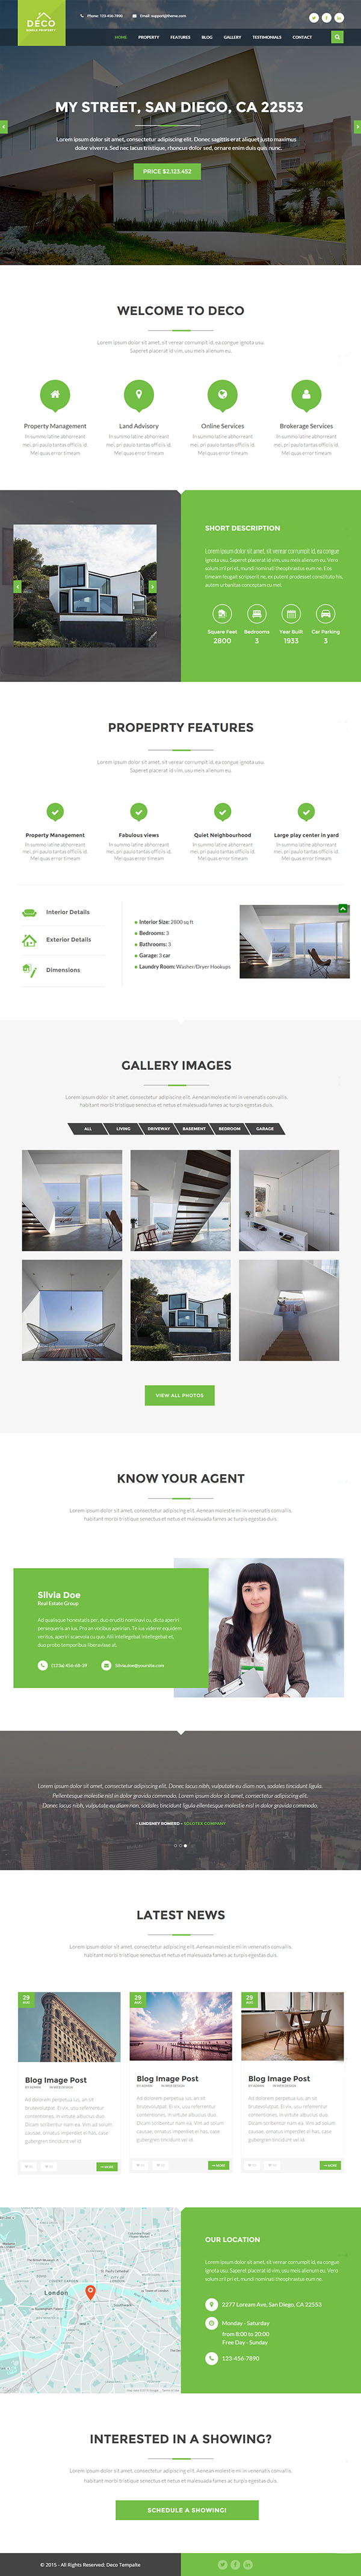 Deco House - Single Property Real Estate HTML Template